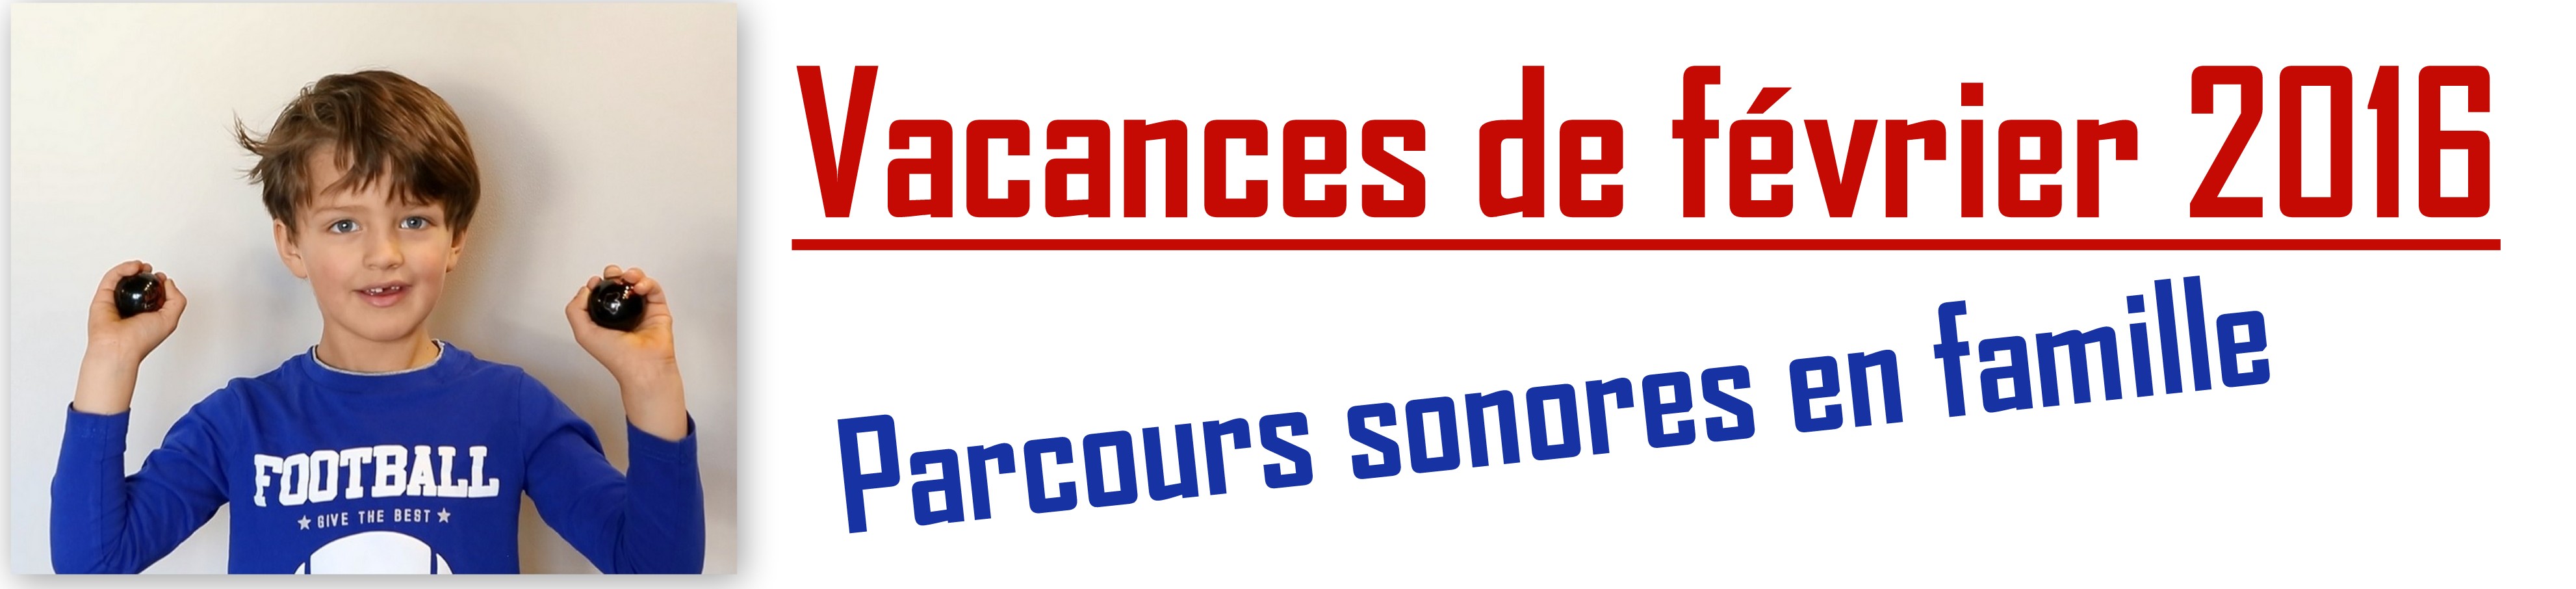 parcours sonores